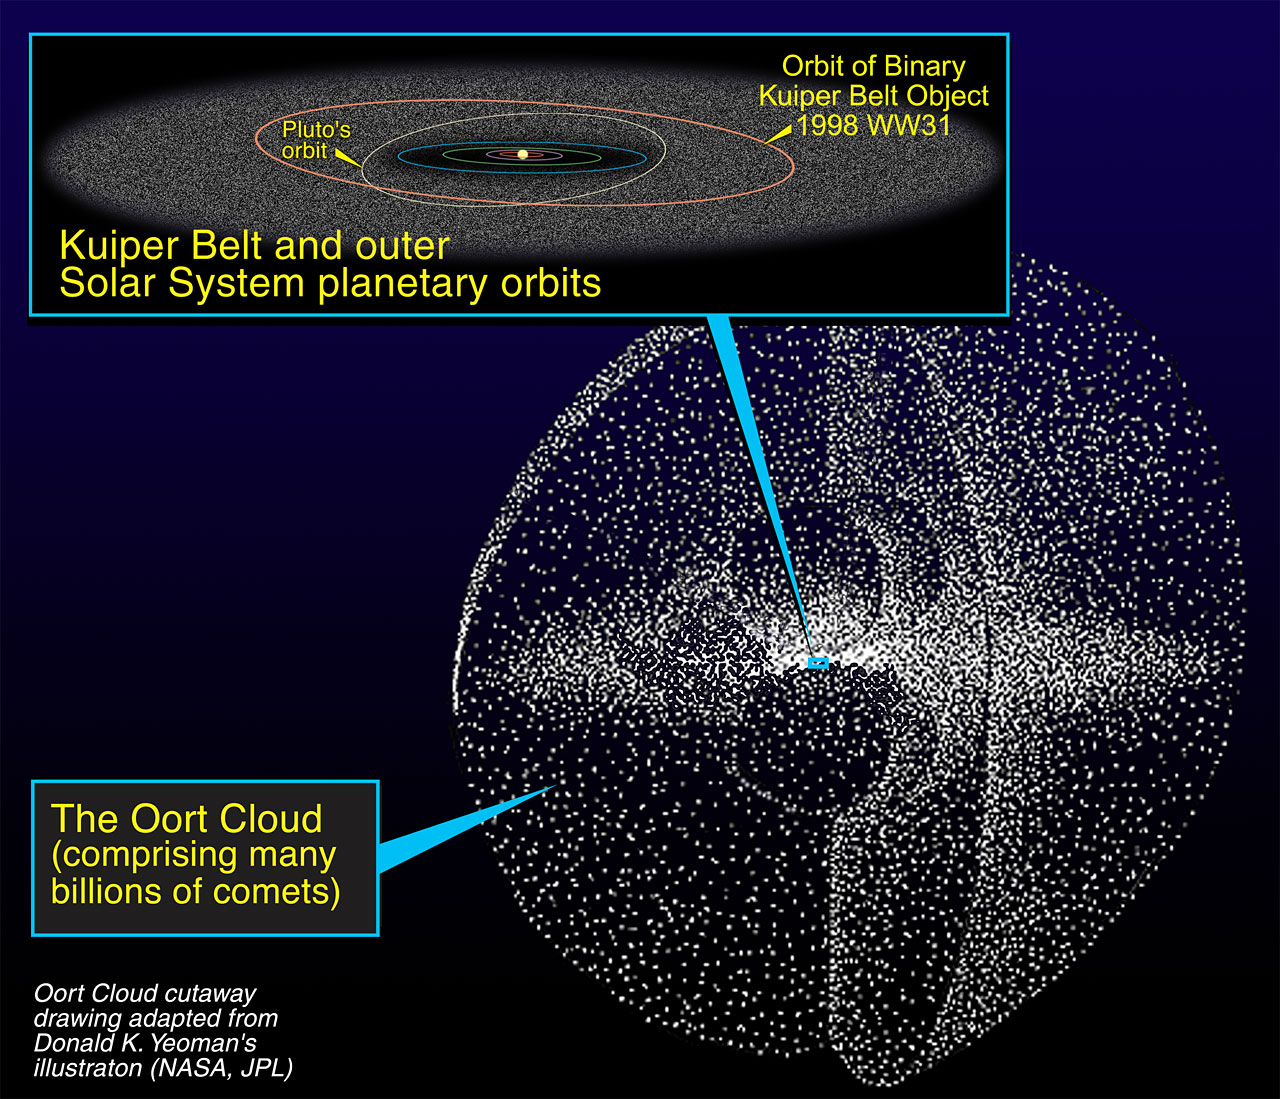 This illustration shows that the Kuiper Belt is shaped like a disk [see inset di.jpg